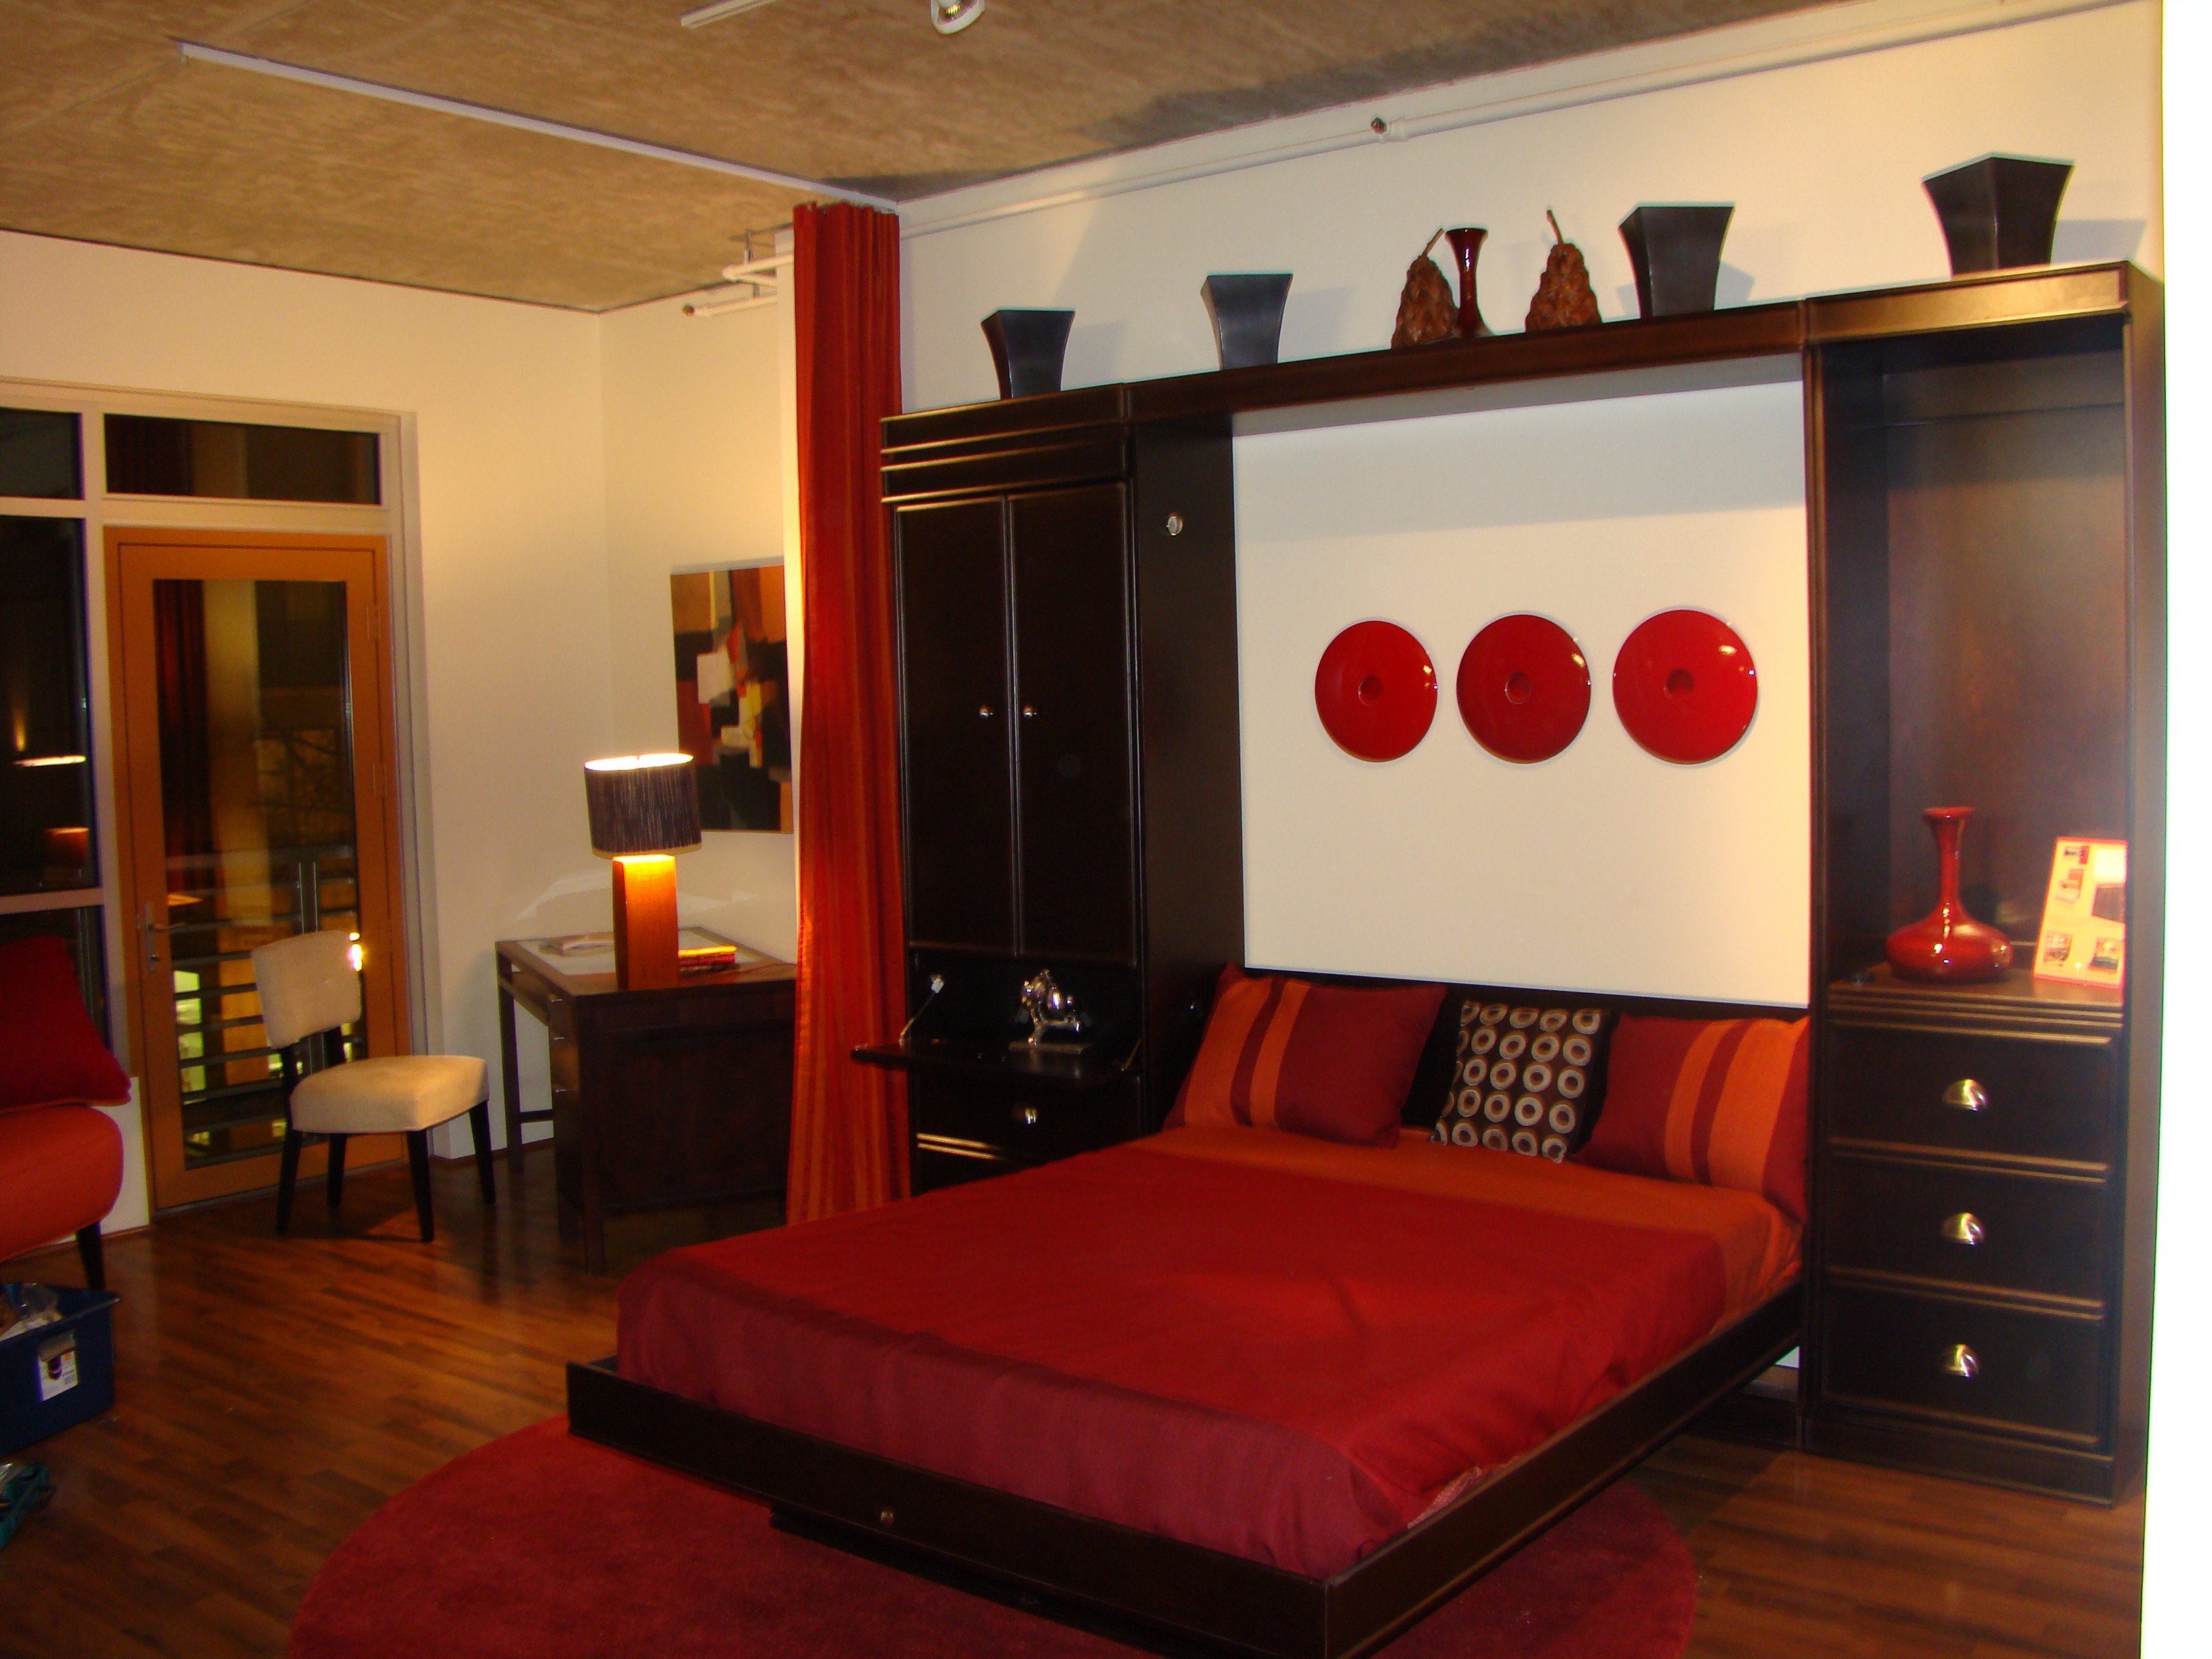 Red and Gray Bedroom Ideas Best Of Bedroom Nice Wood Bed Bedroom Hohodd for Furniture Red